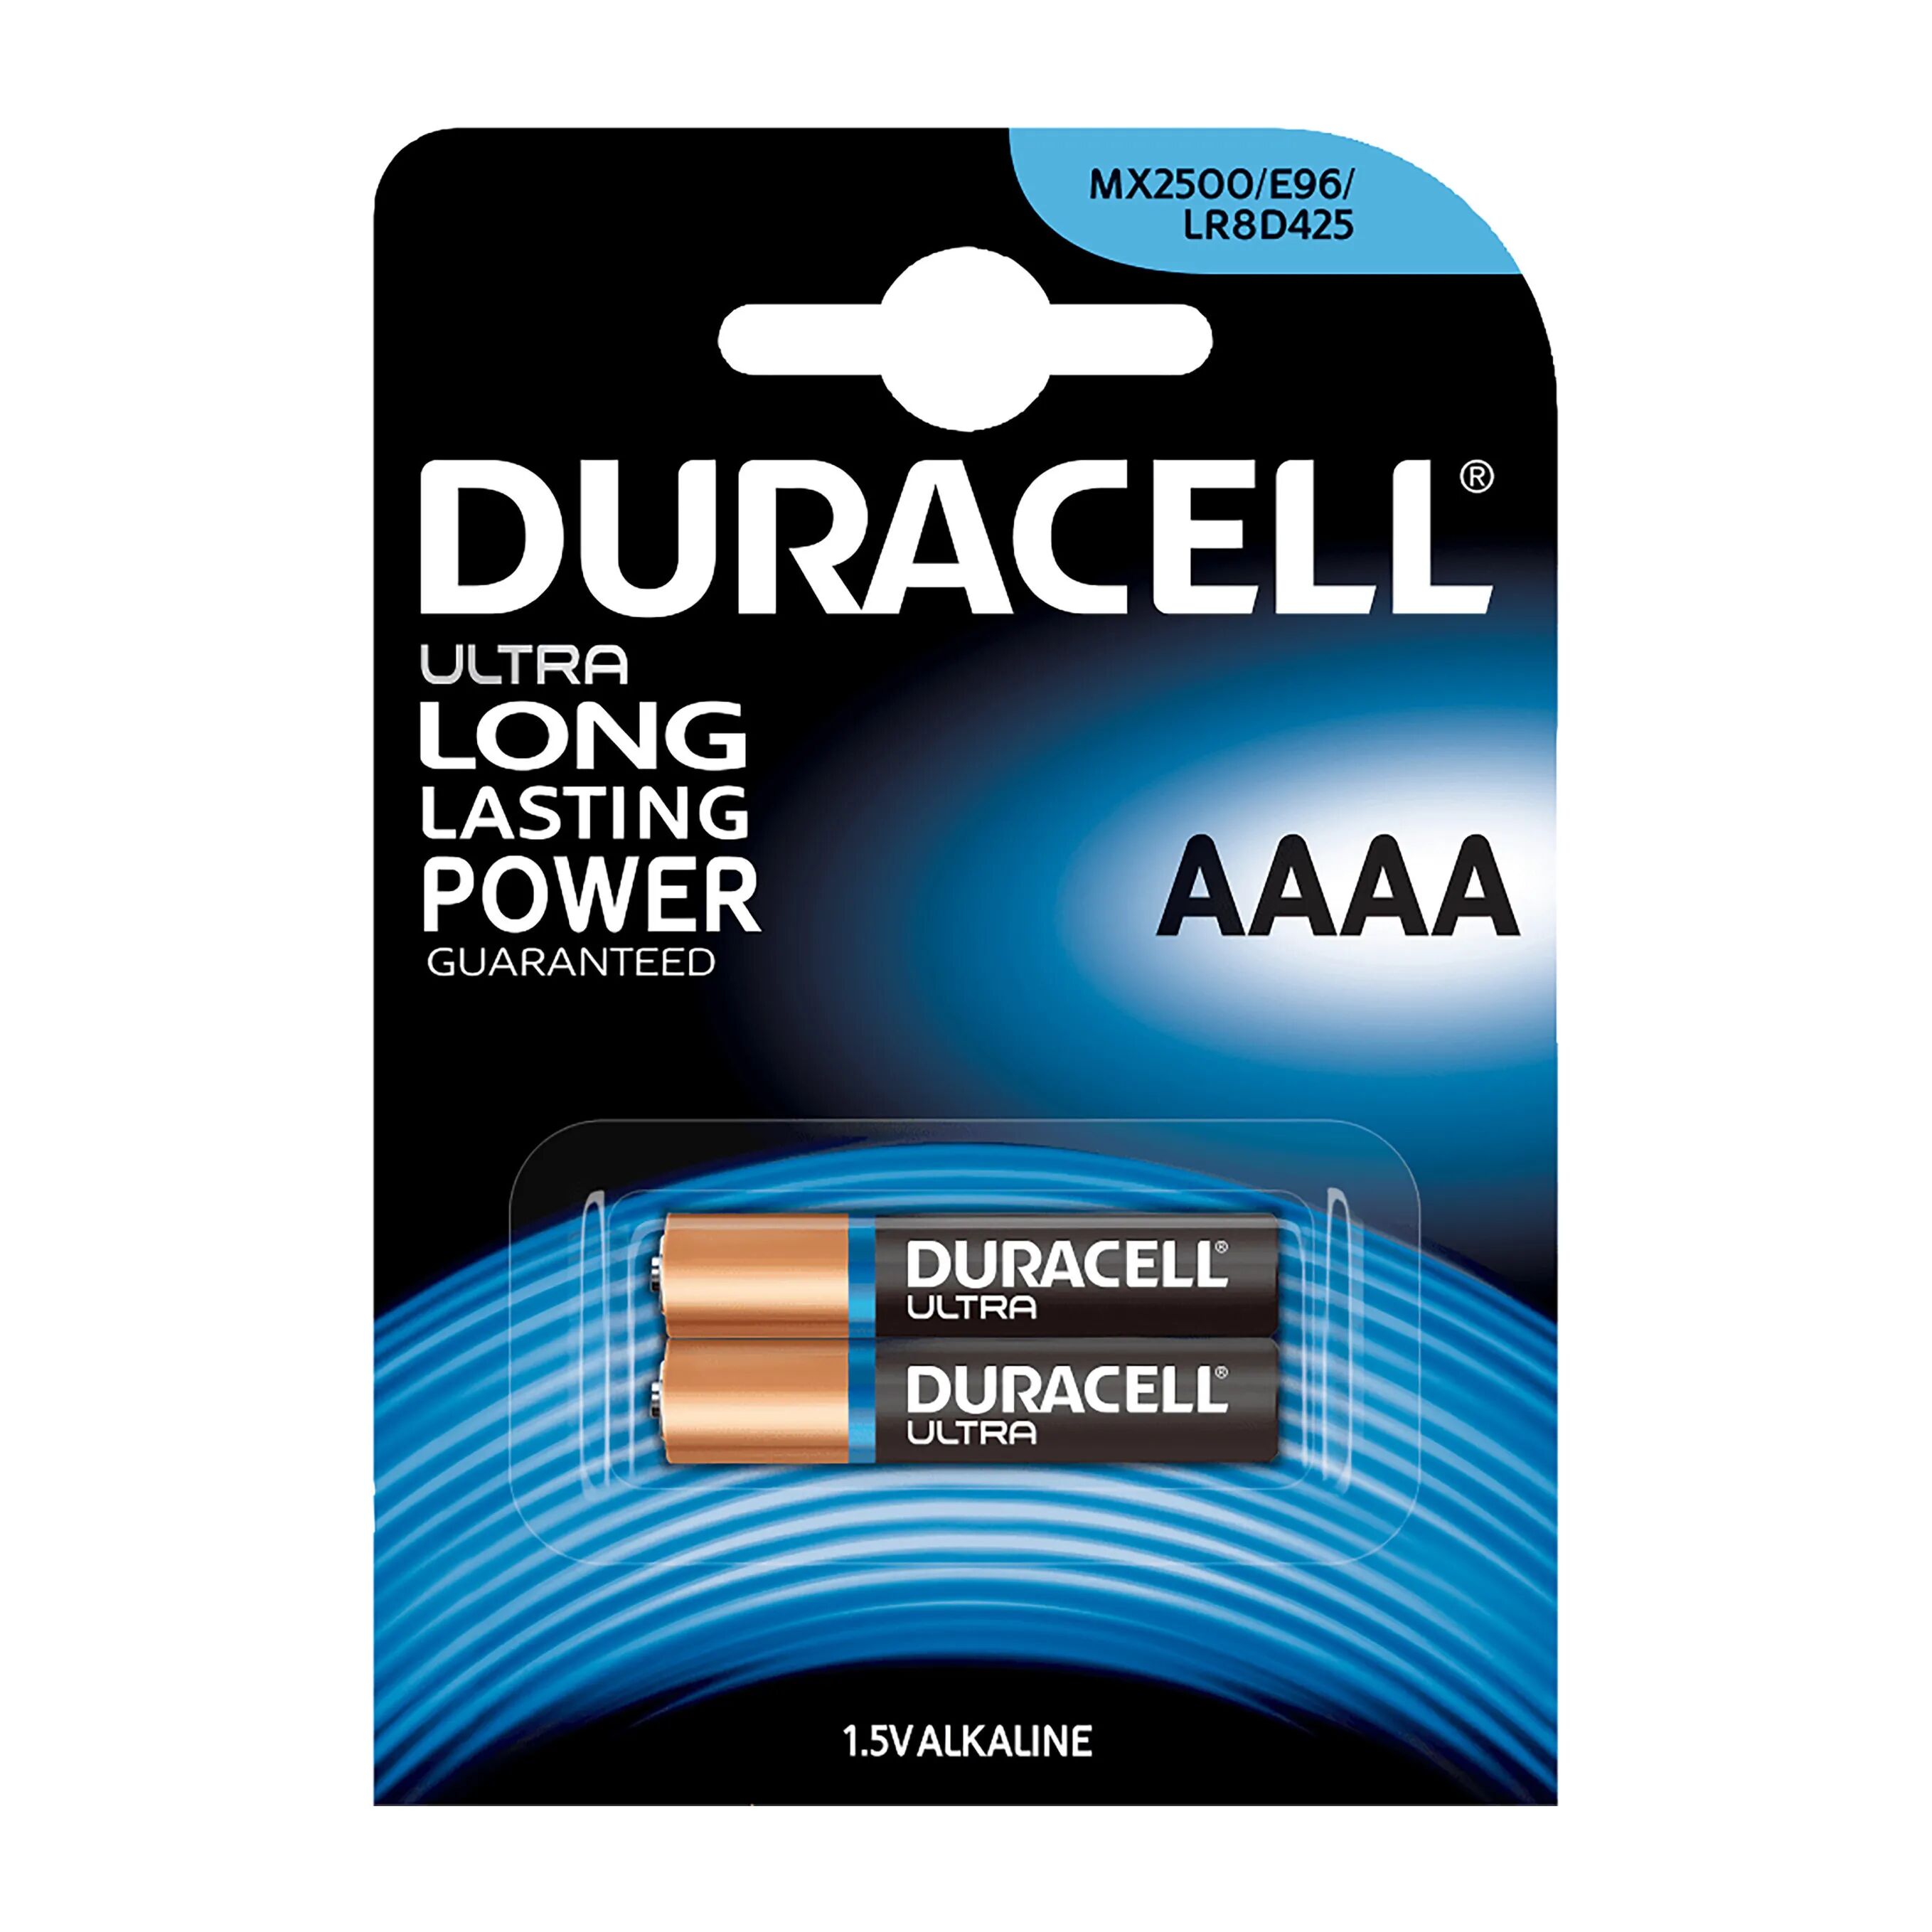 Tecnomat 2 BATTERIE DURACELL SPECIALISTICHE 1,5V FORMATO AAAA MN2500